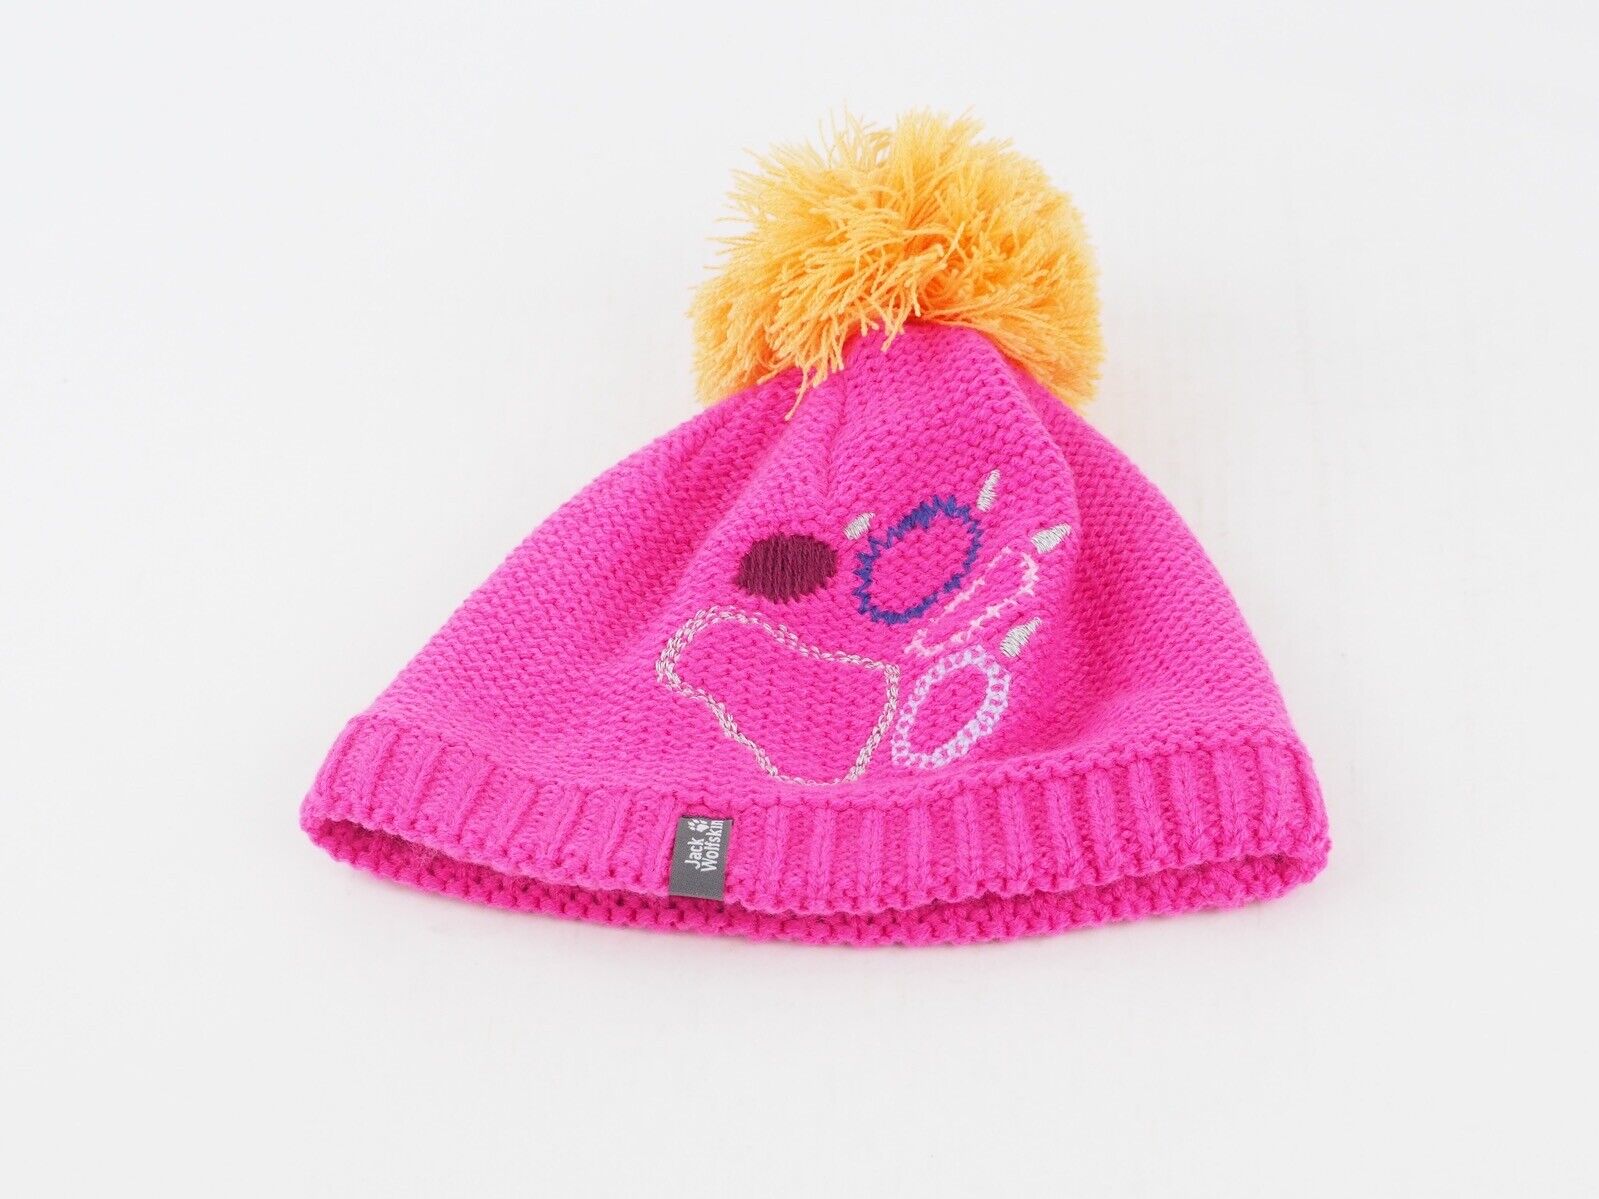 Girls Jack Wolfskin Knit Cap Winter – A Hat Top Style Pink Paw Warm London With Pom Print